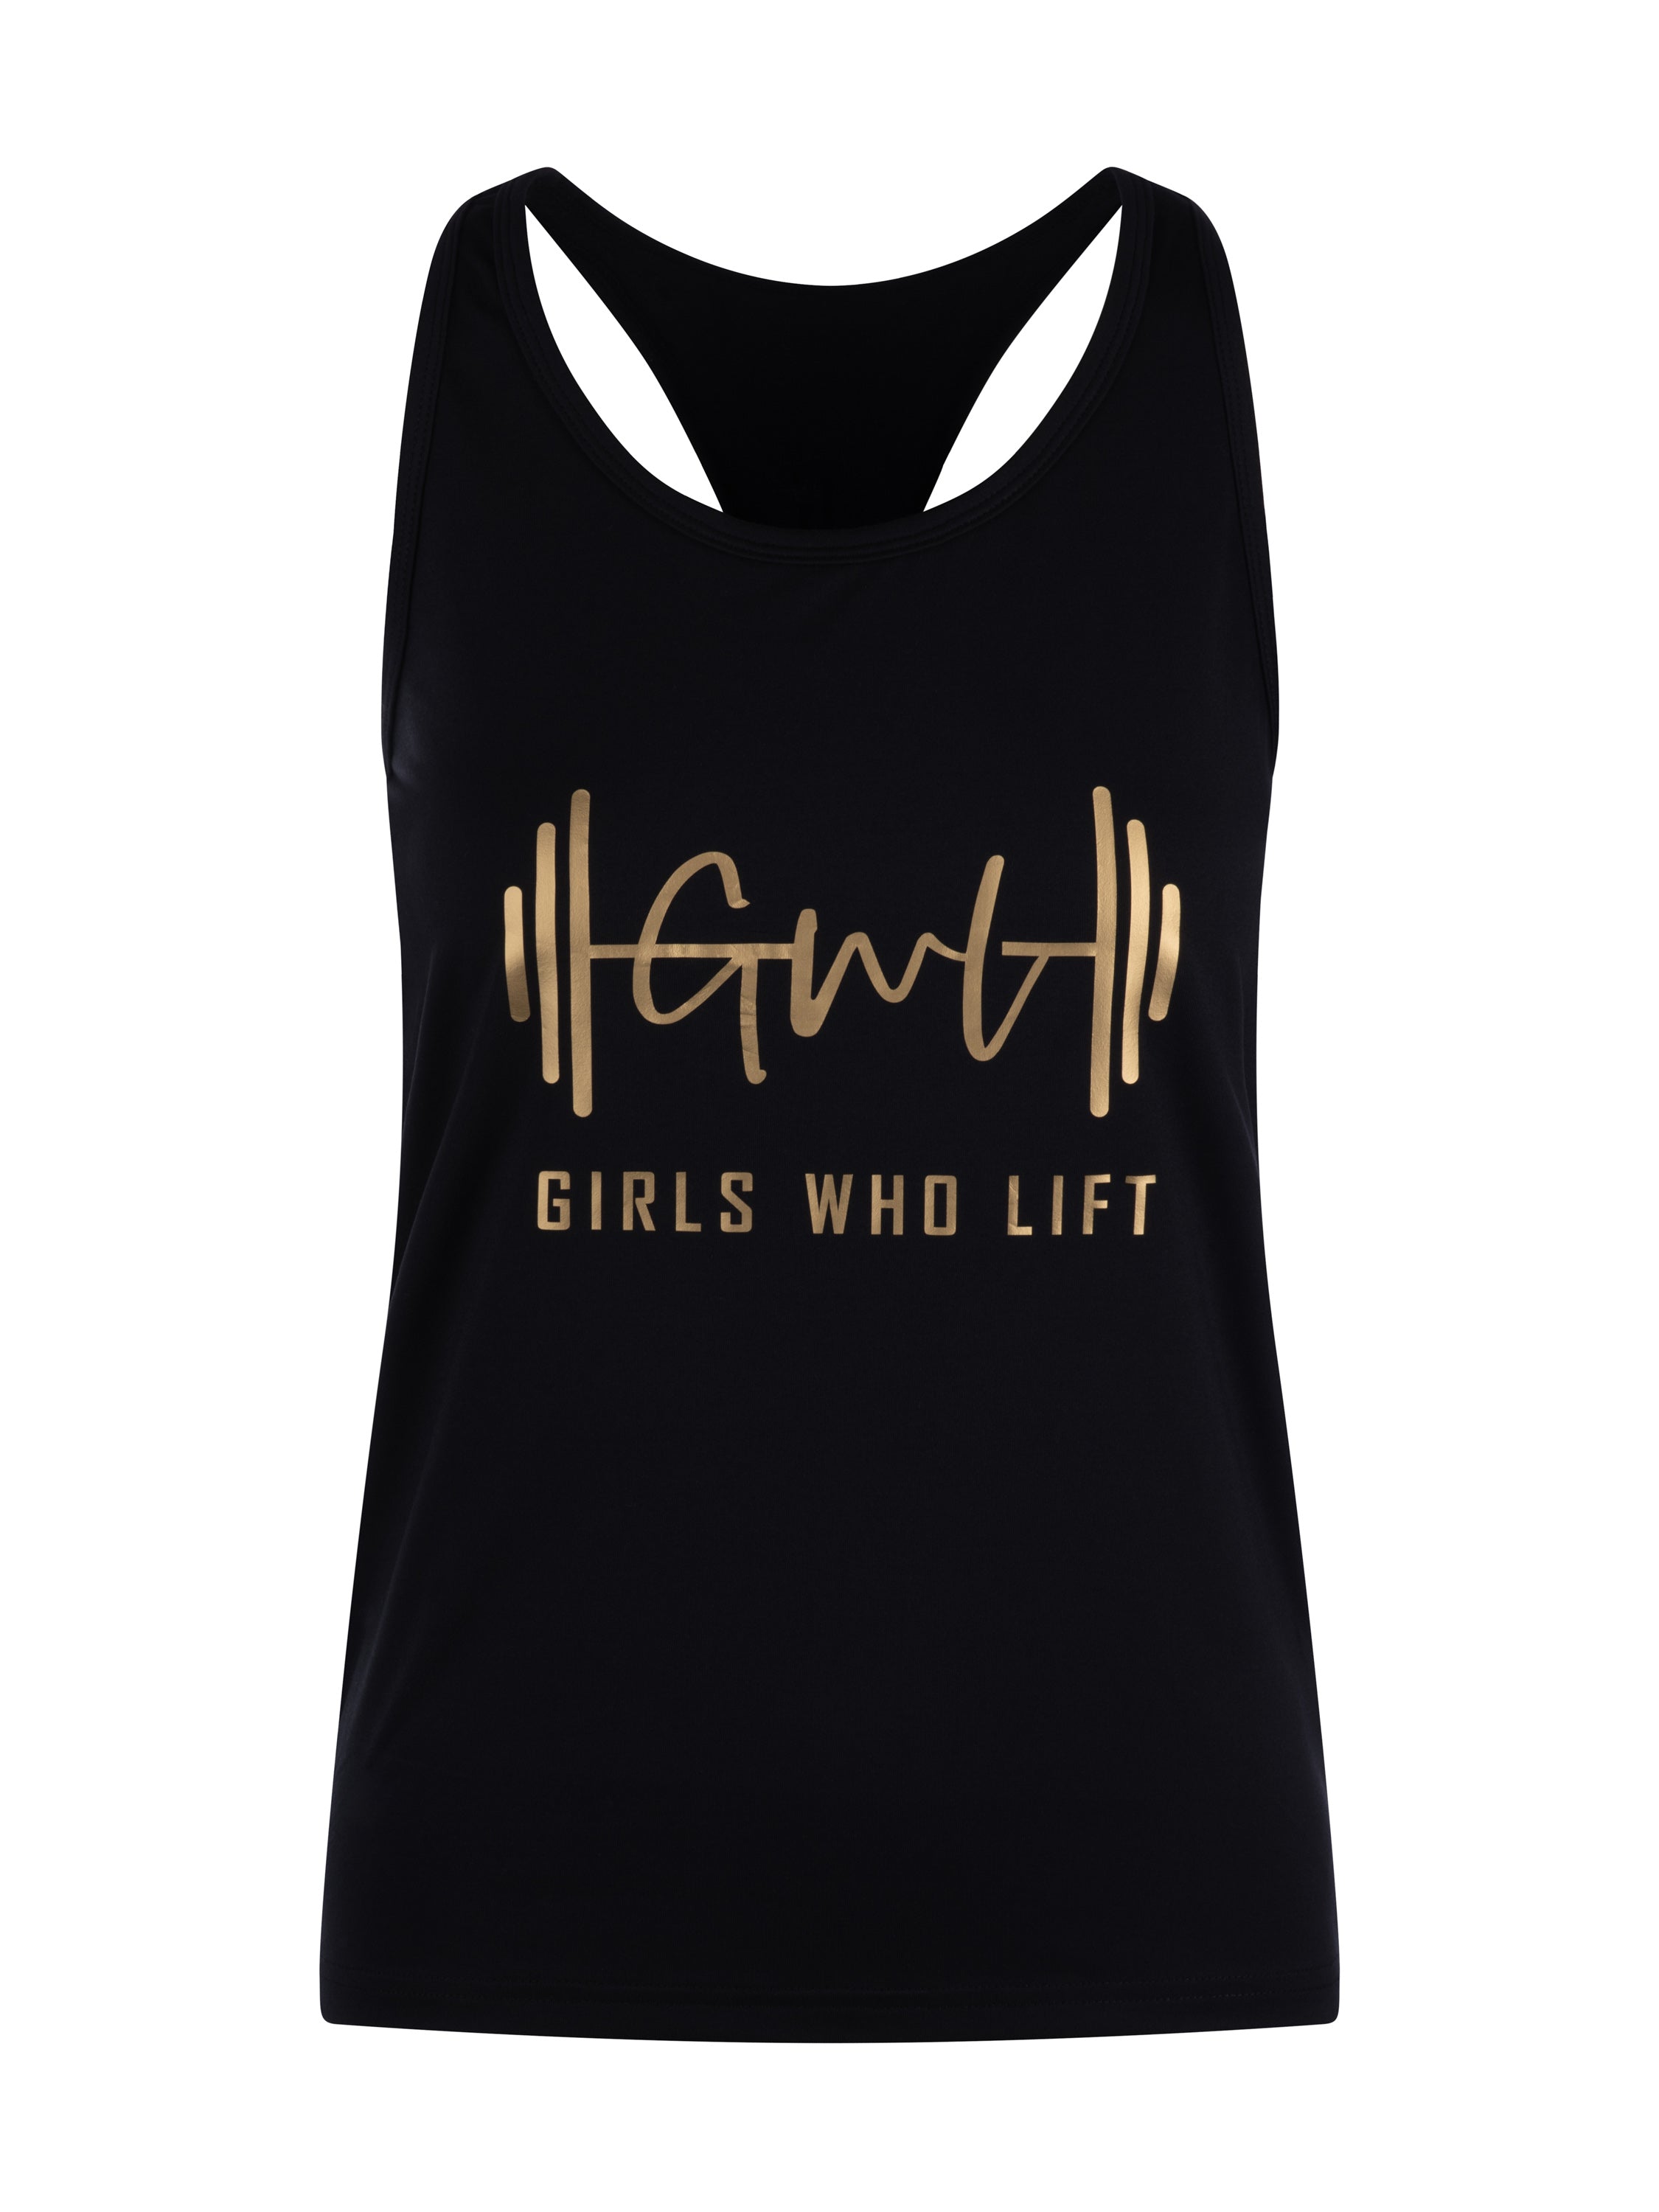 Girls Who Lift workout vest with gold print